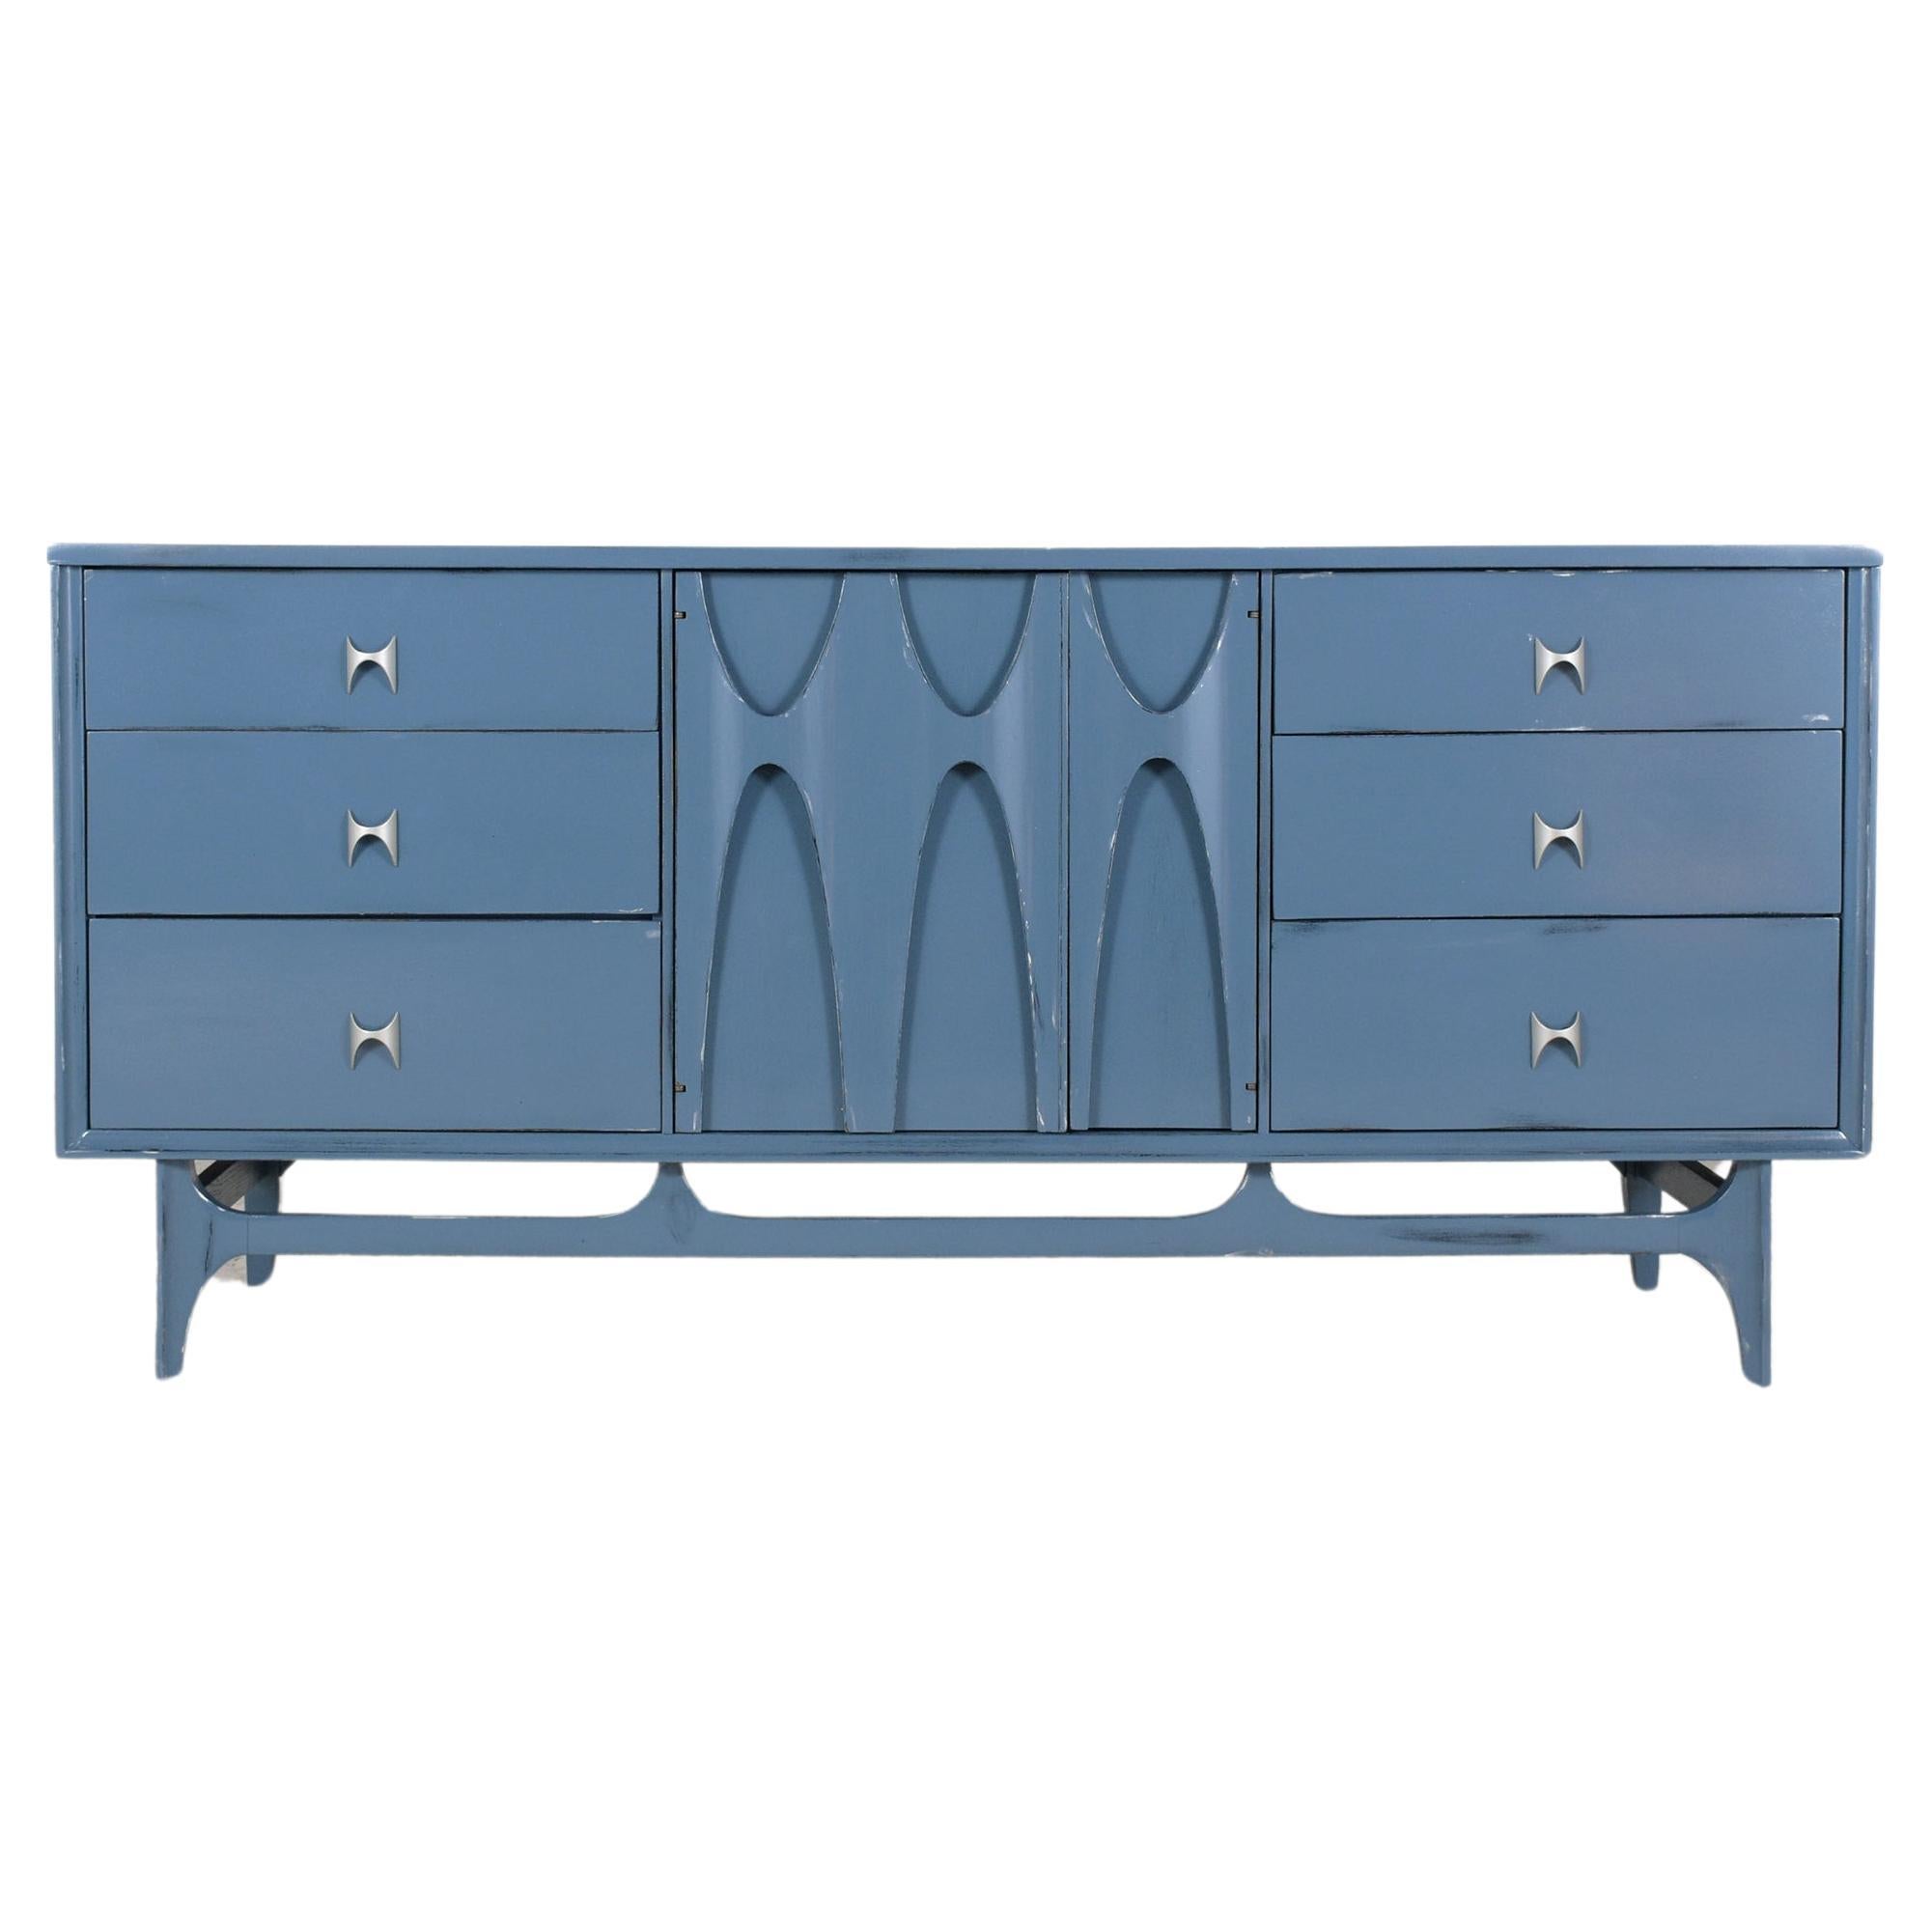 Rediscover the 1960s elegance with our beautifully restored Broyhill Brasilia credenza, a shining example of mid-century modern design's enduring allure. Skilled artisans have meticulously revitalized this piece, now boasting a vibrant custom blue